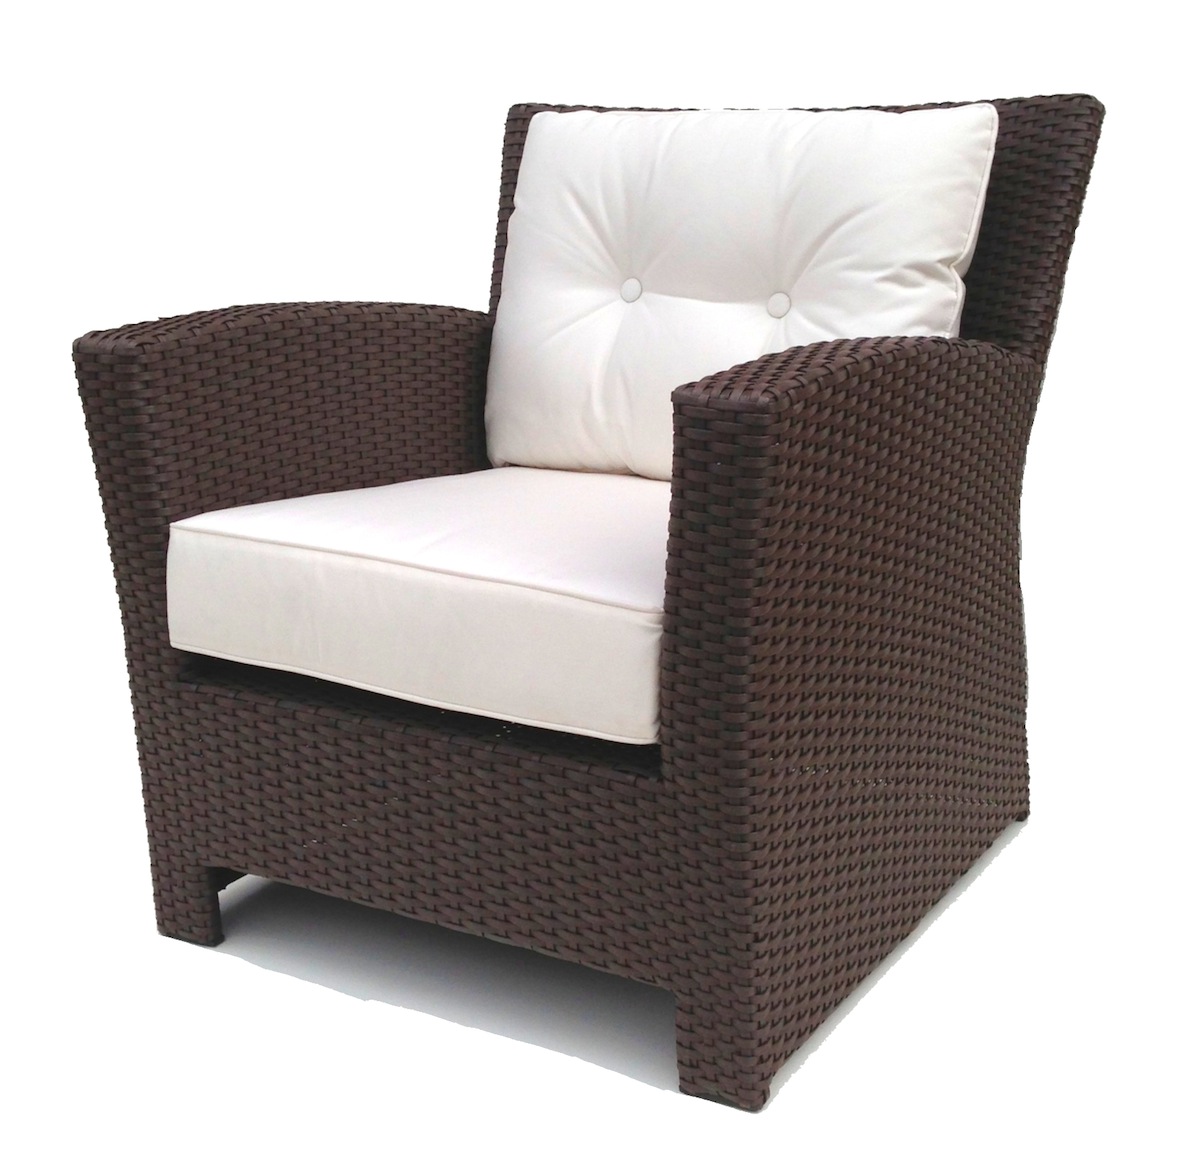 Outdoor wicker chairs  46